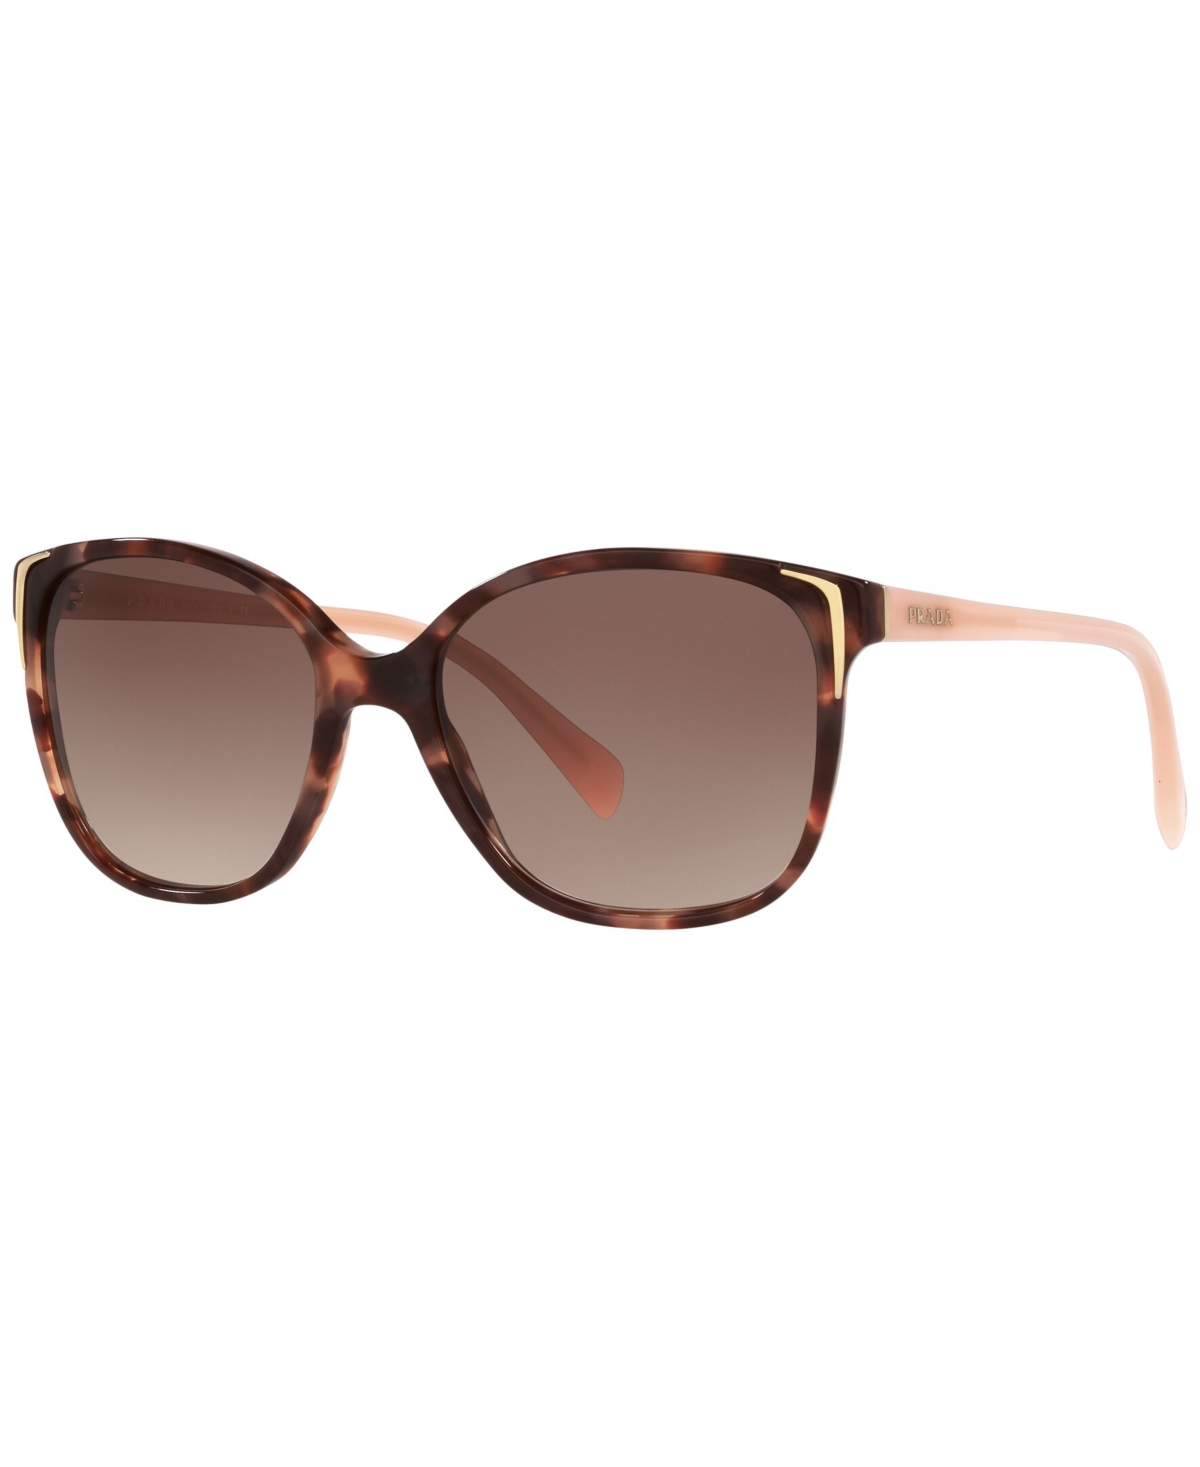 Prada Women's Sunglasses, Pr 01os In Spotted Brown Pink